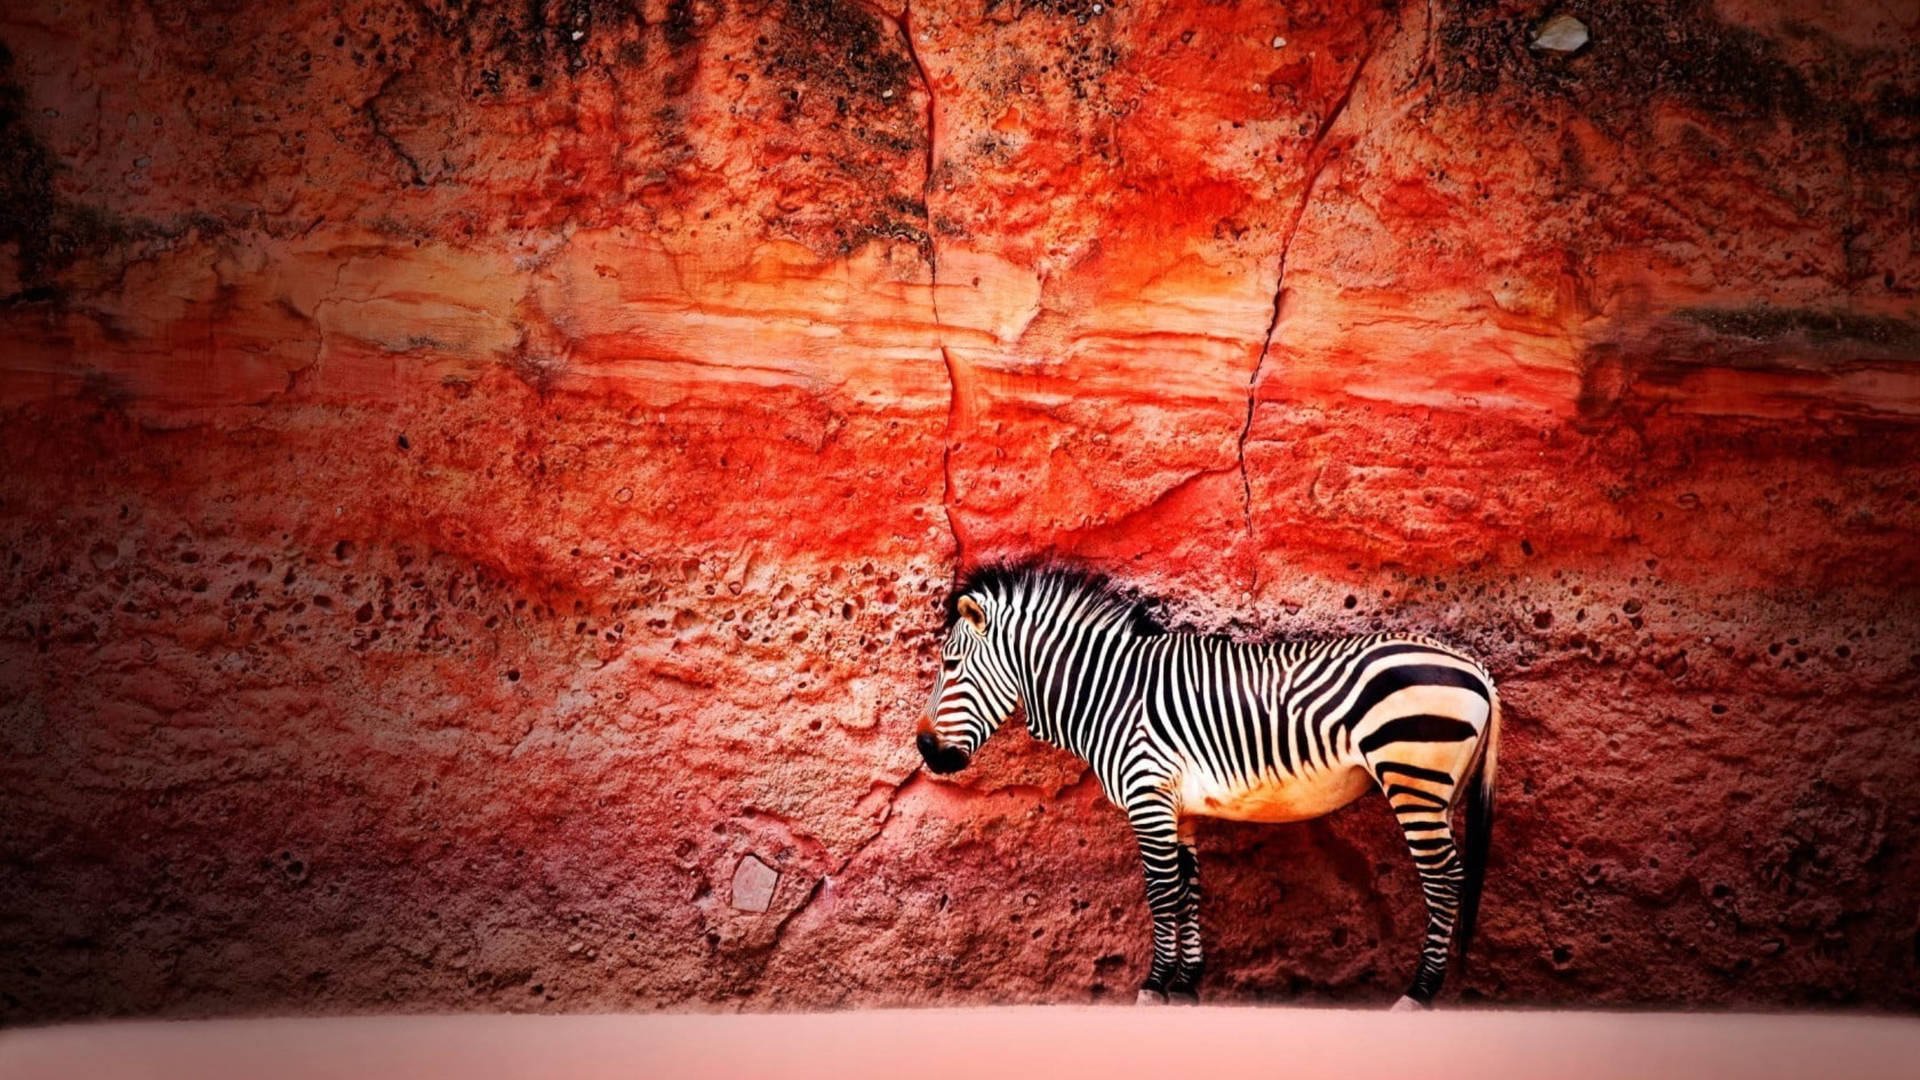 Zebra Against Red Rock Wall Background